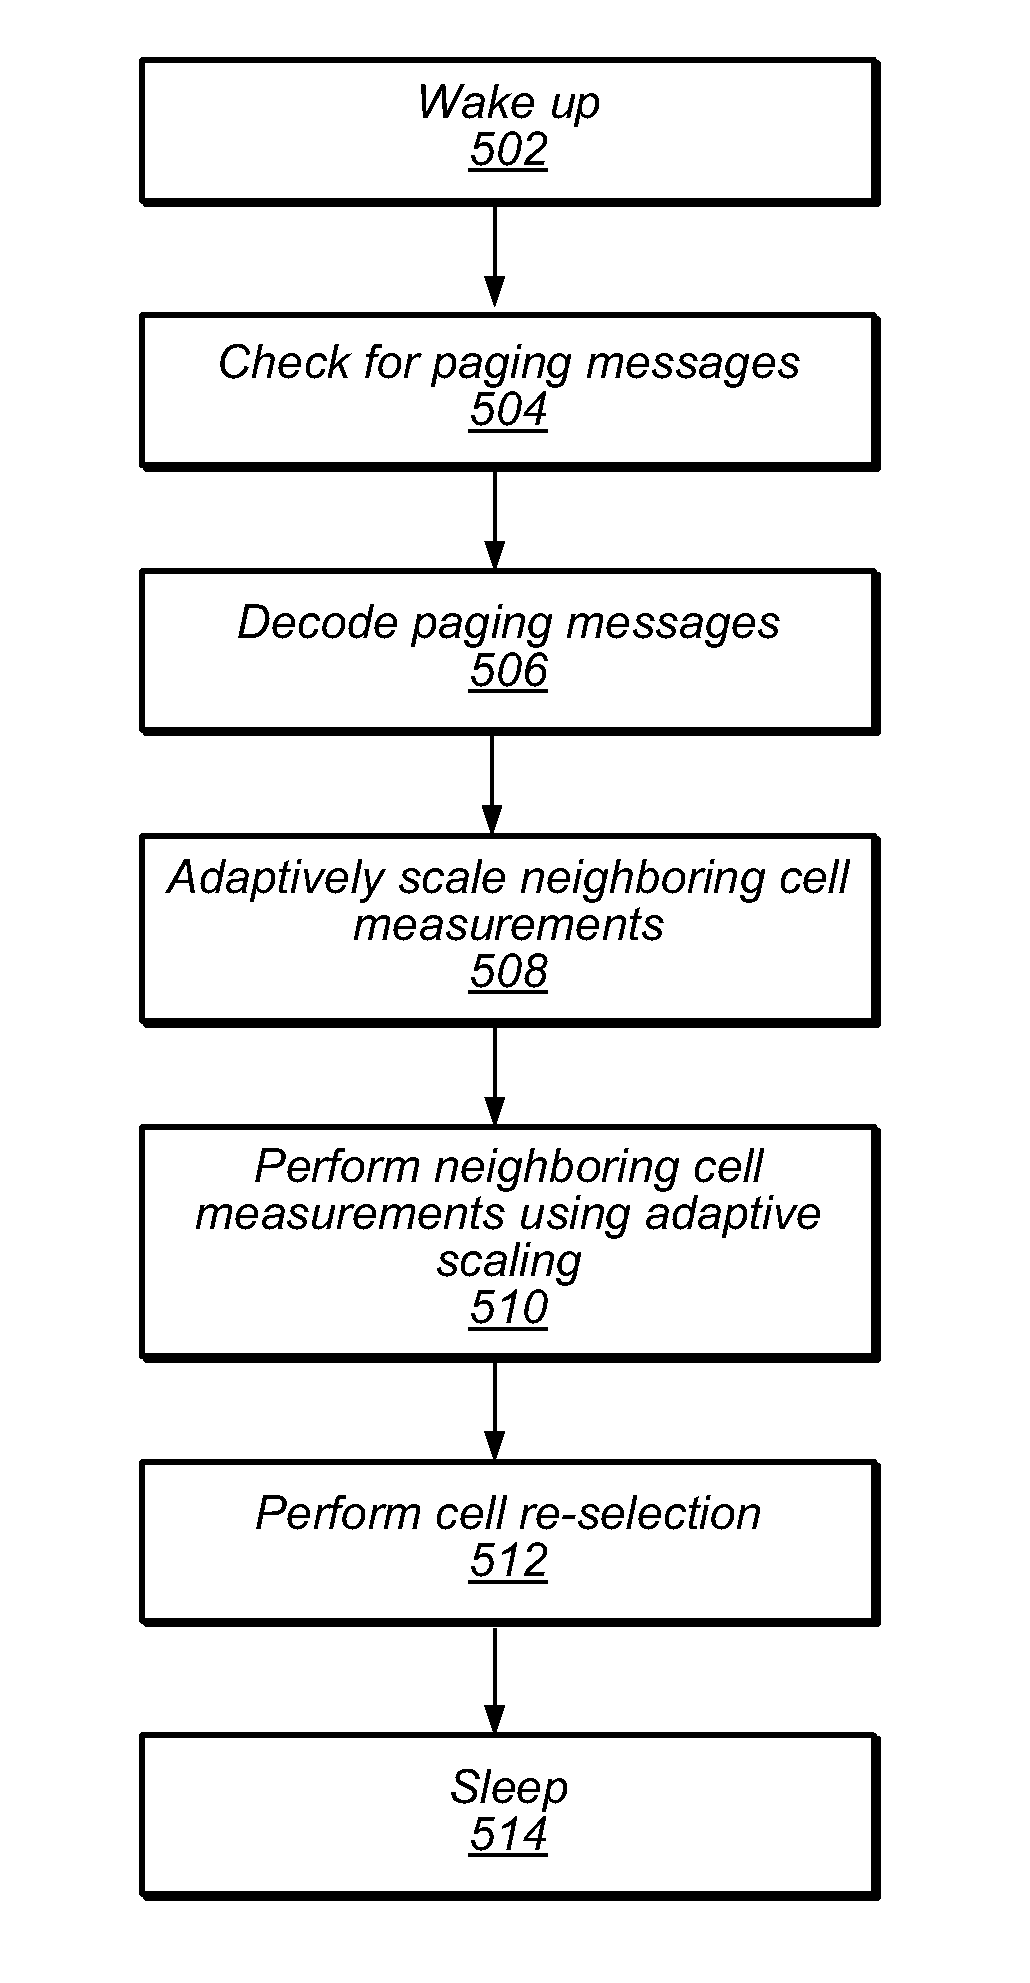 Adaptive neighboring cell measurement scaling for wireless devices